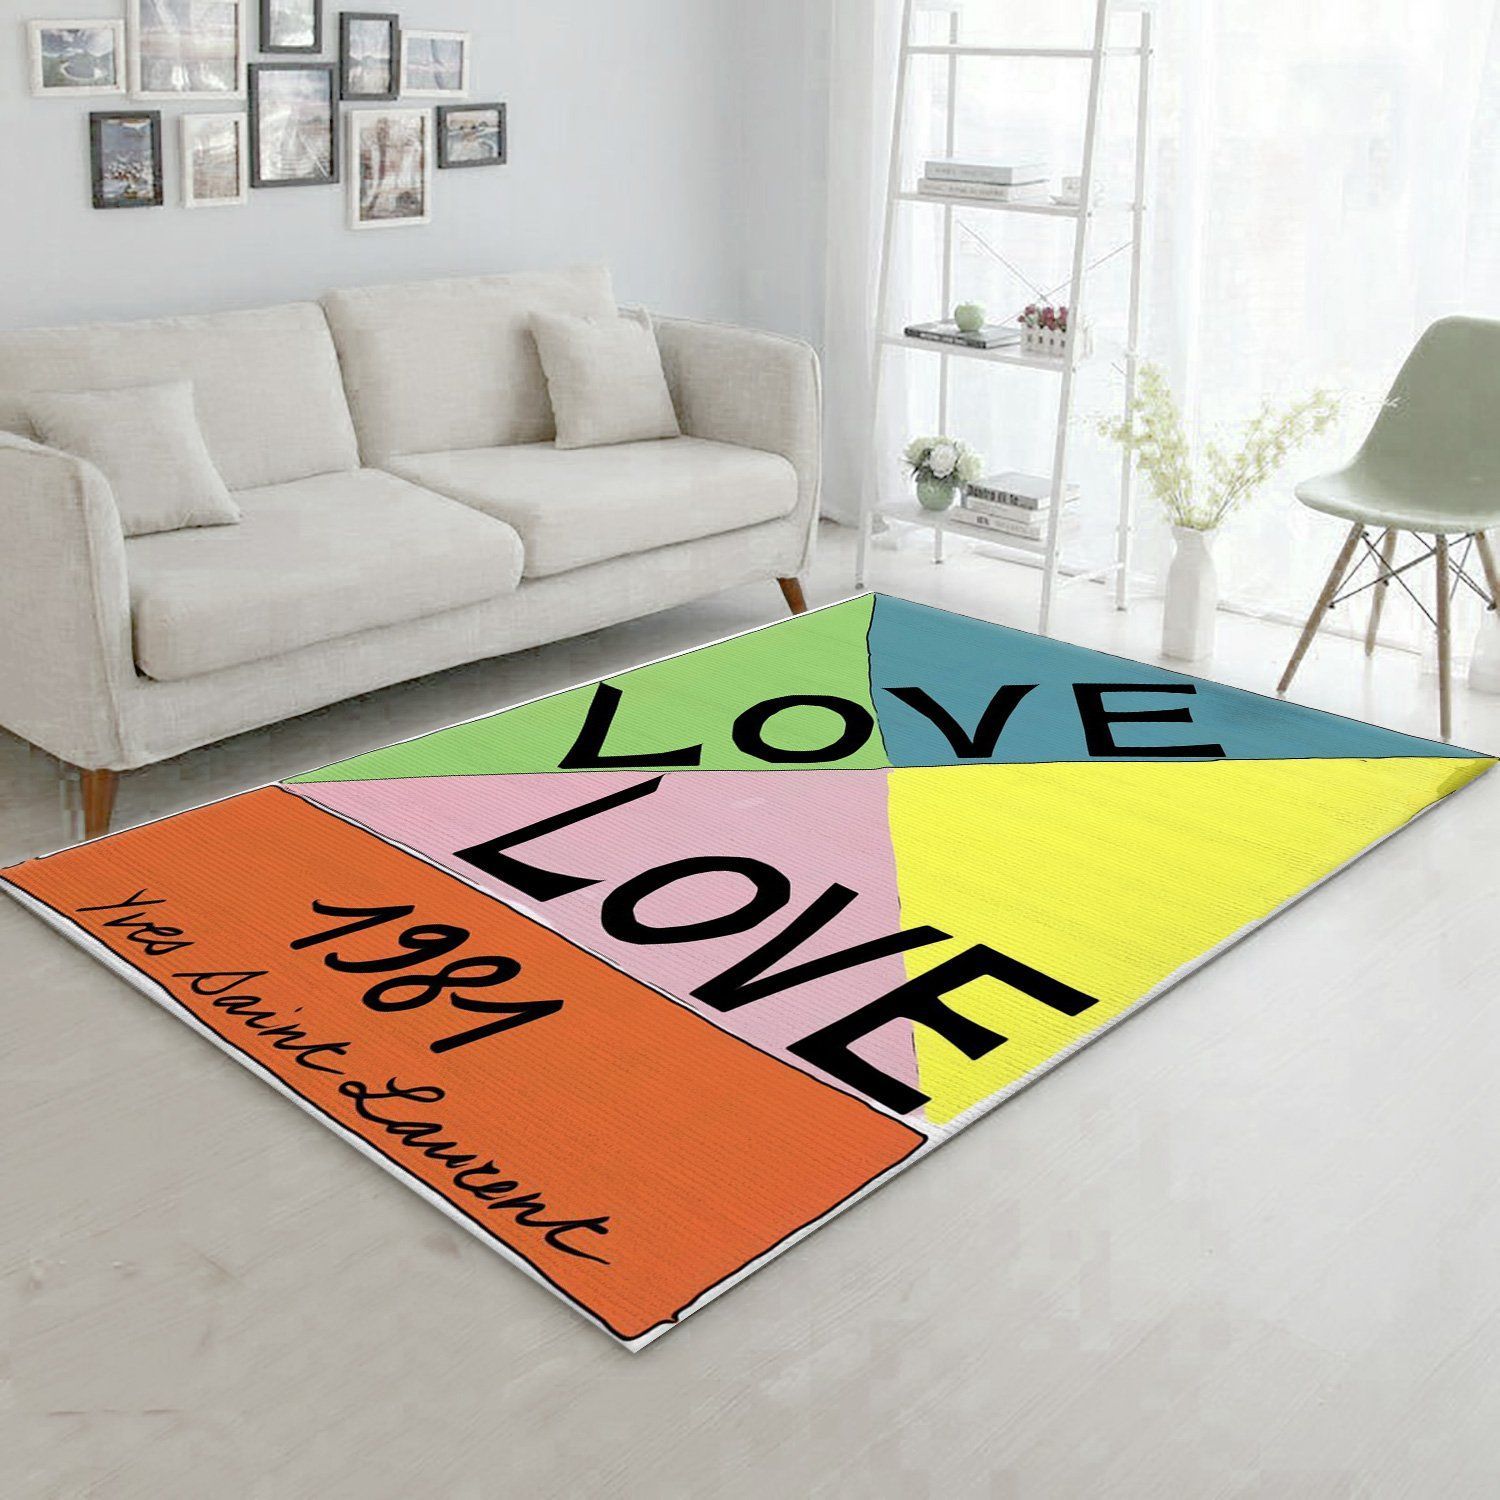 Ysl Vintage Love Poster Area Rugs Living Room Rug Christmas Gift US Decor - Indoor Outdoor Rugs 2